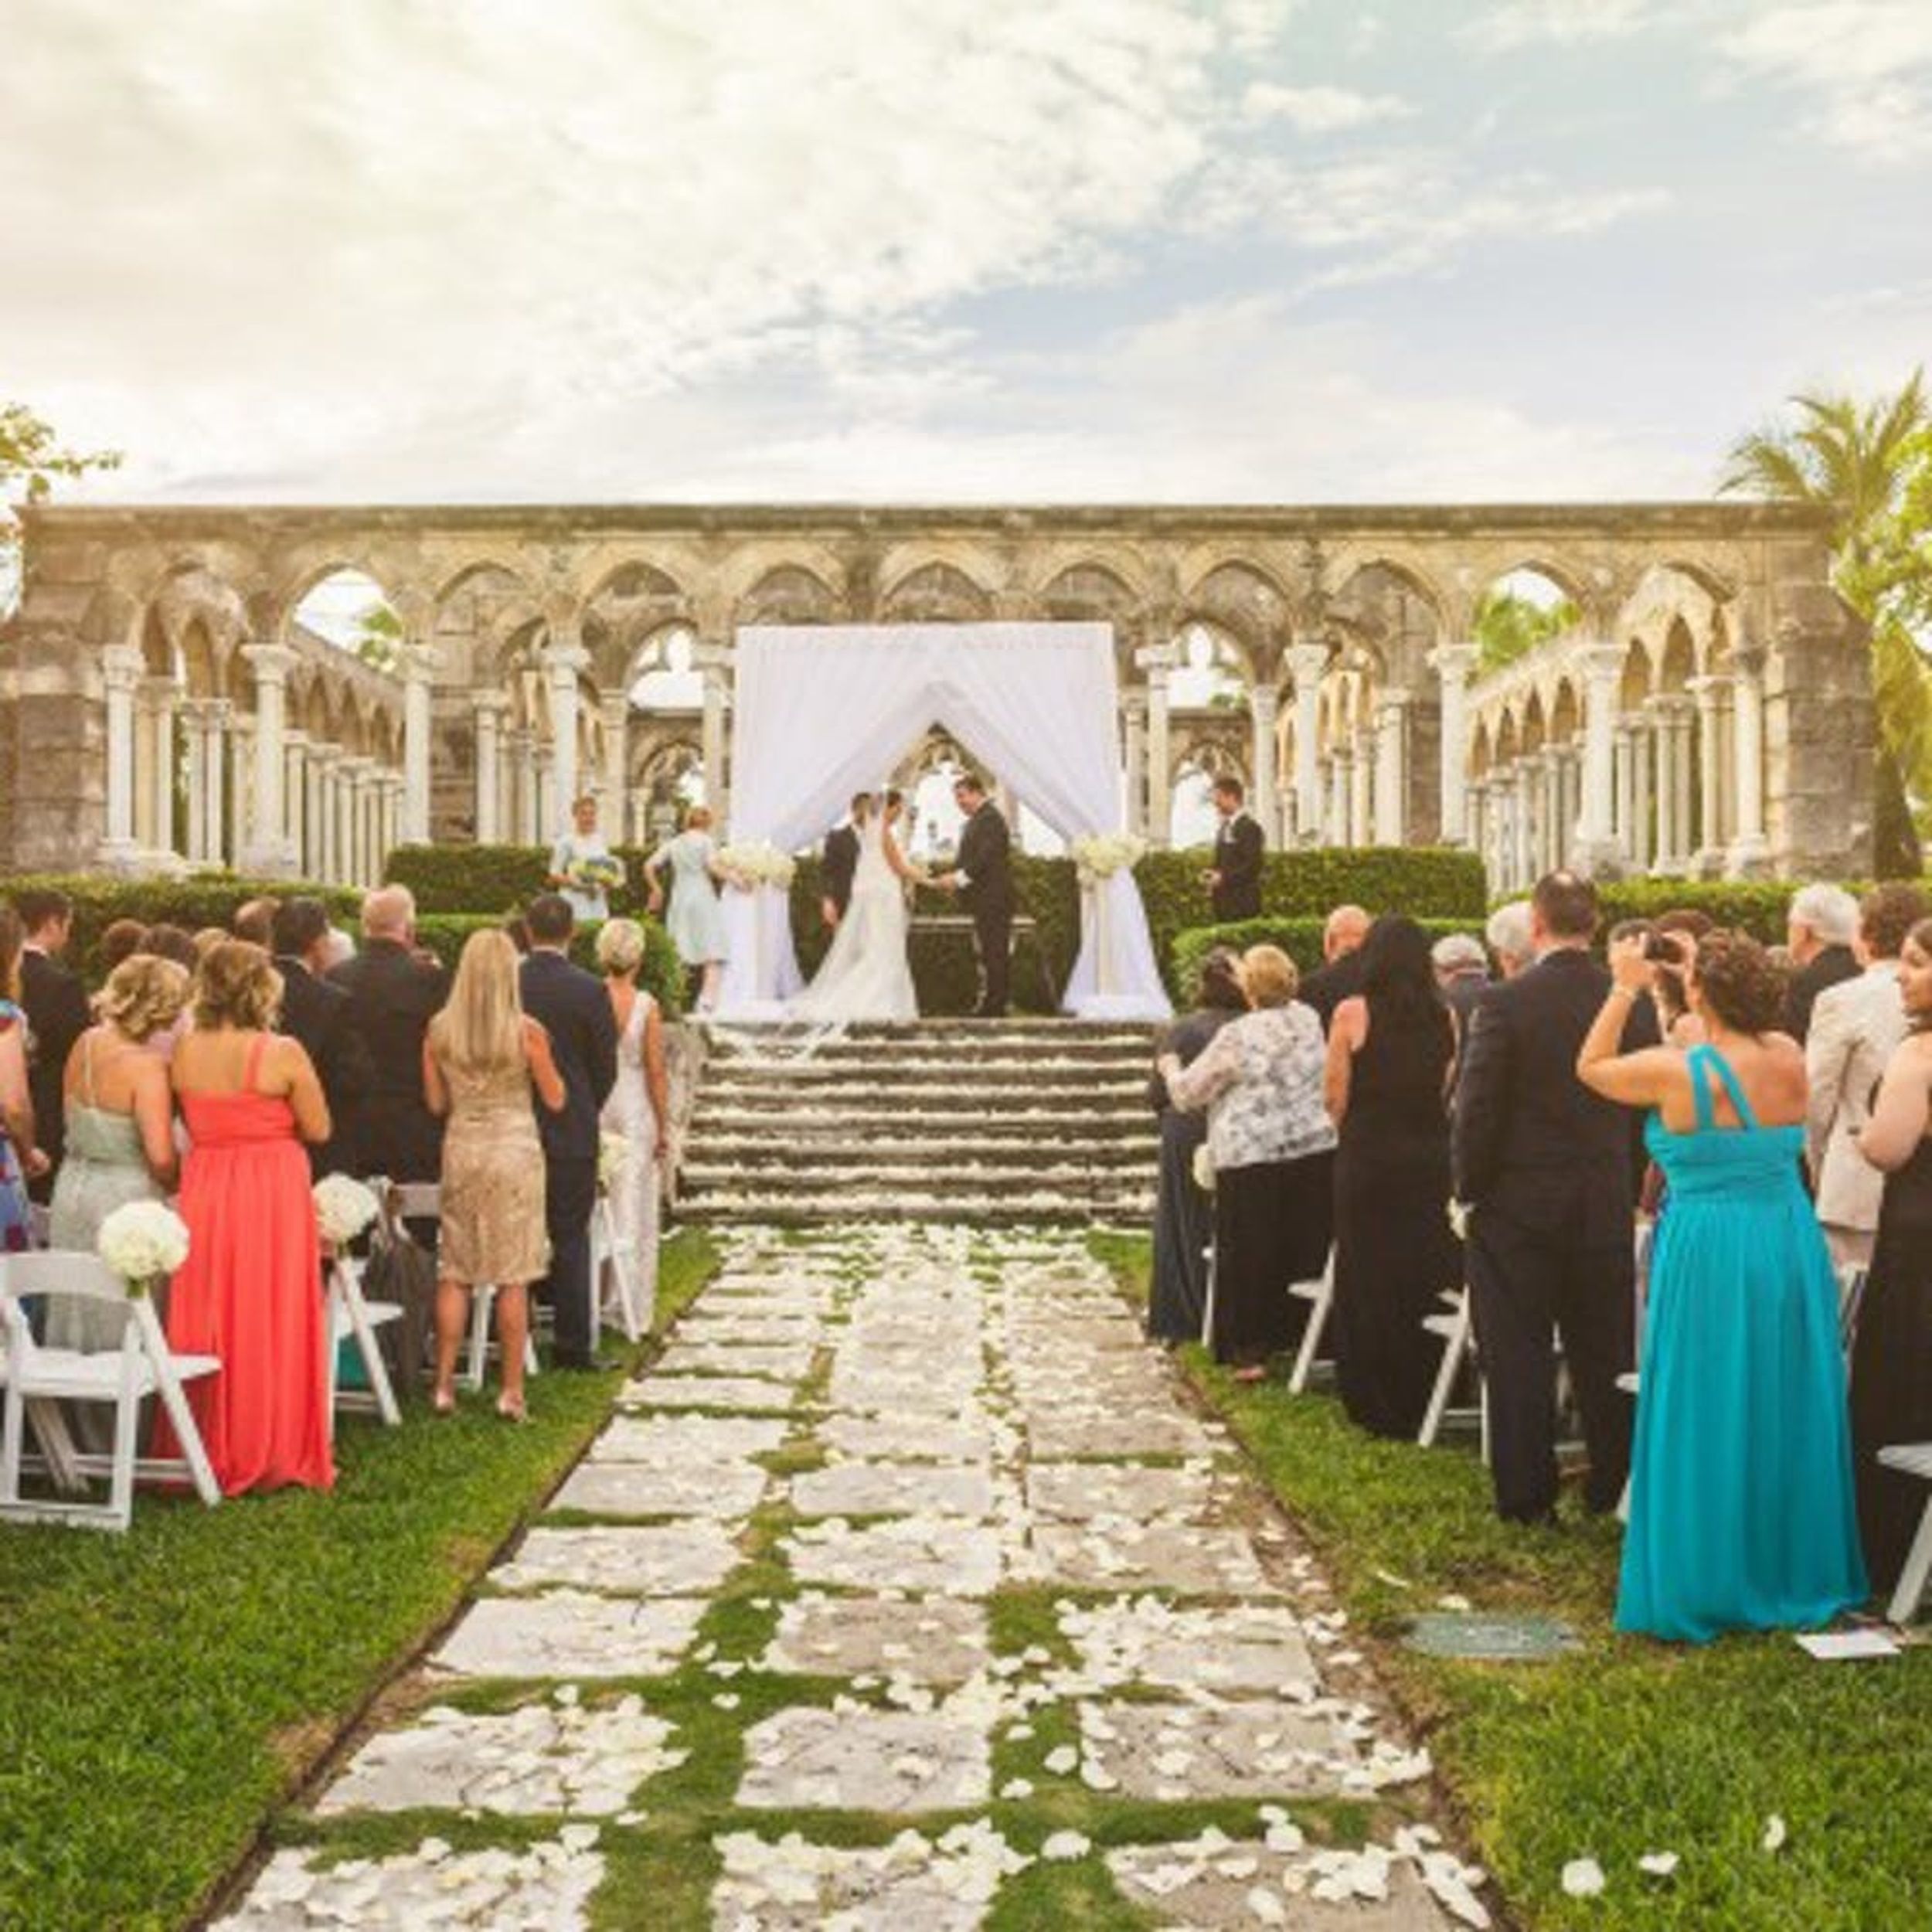 Dream Wedding Venues You Can Get for… $5,000